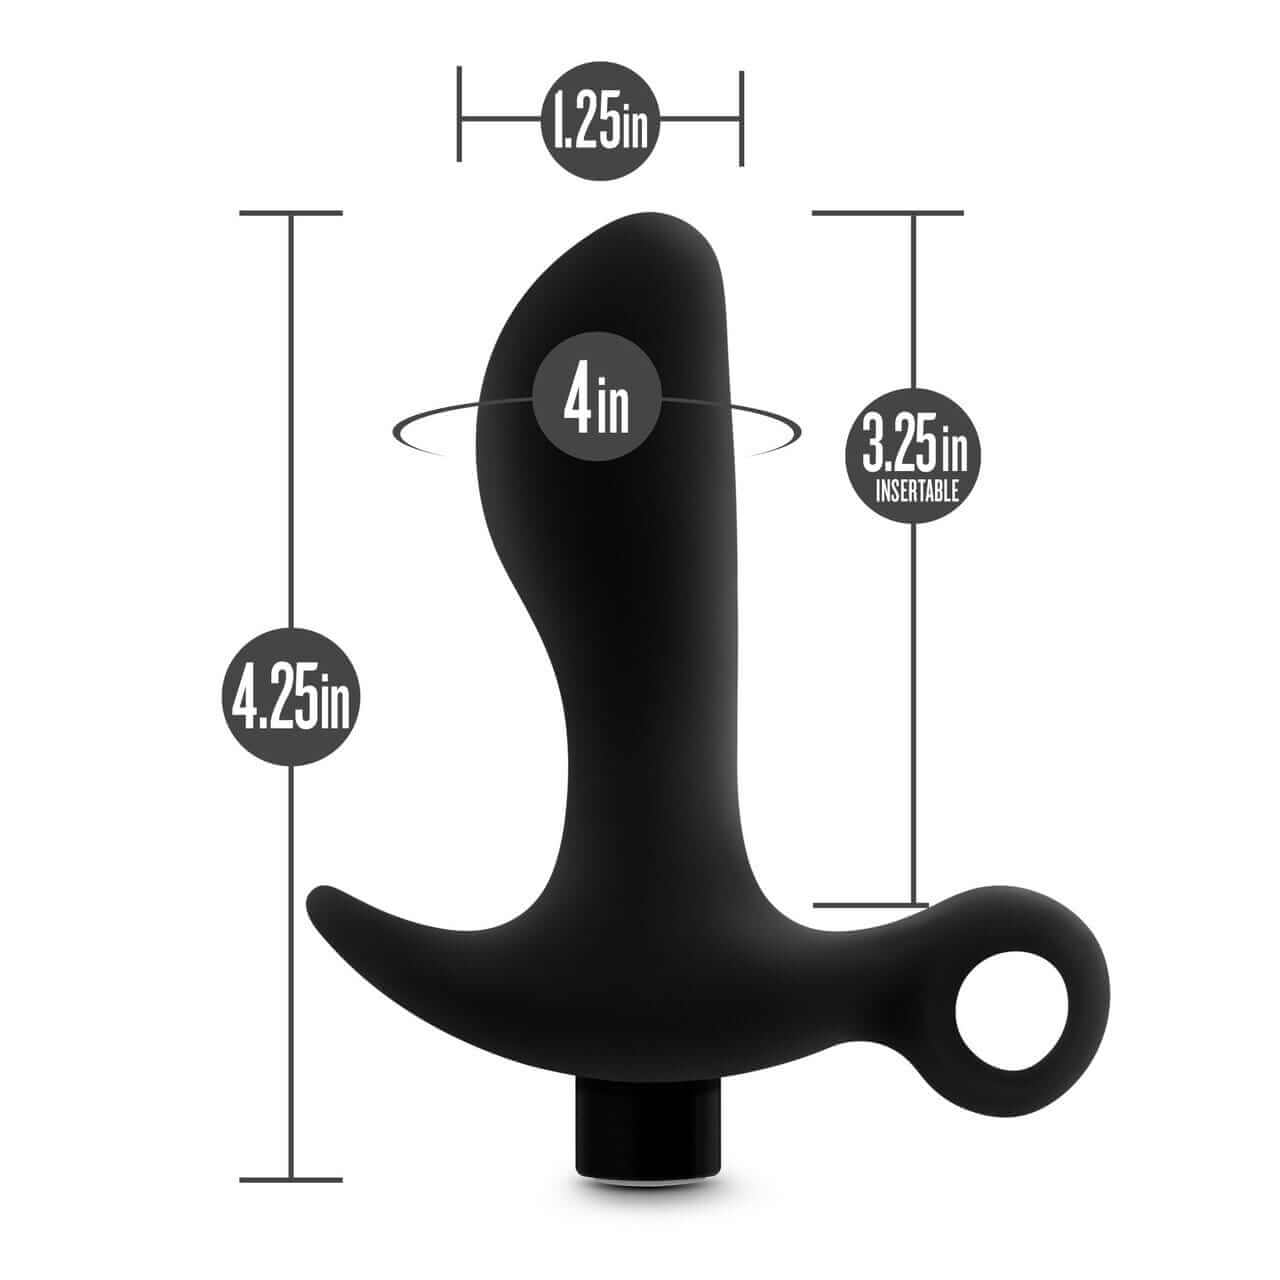 Silicone Vibrating Prostate Massager 01 - Black - Thorn & Feather Sex Toy Canada